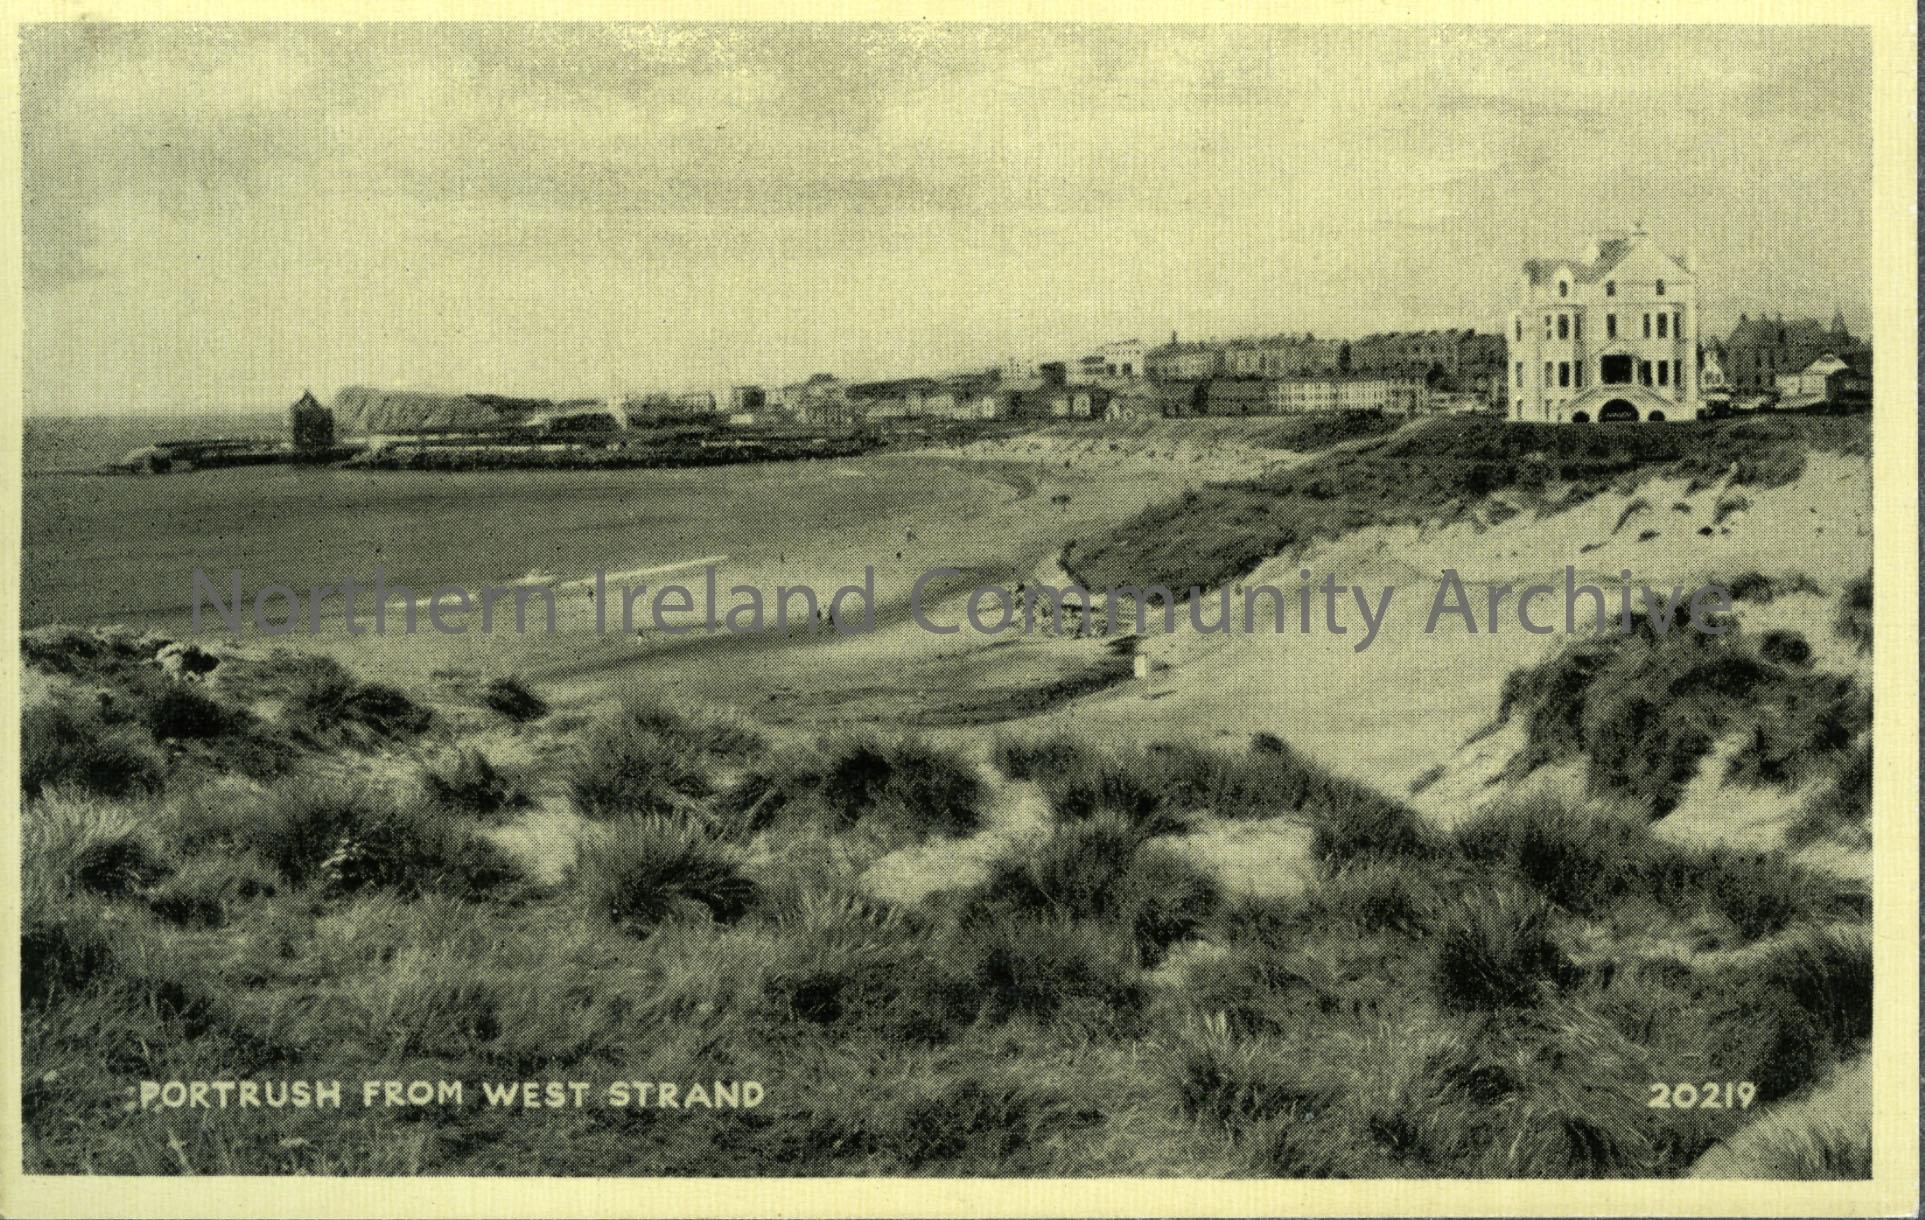 Portrush from west strand